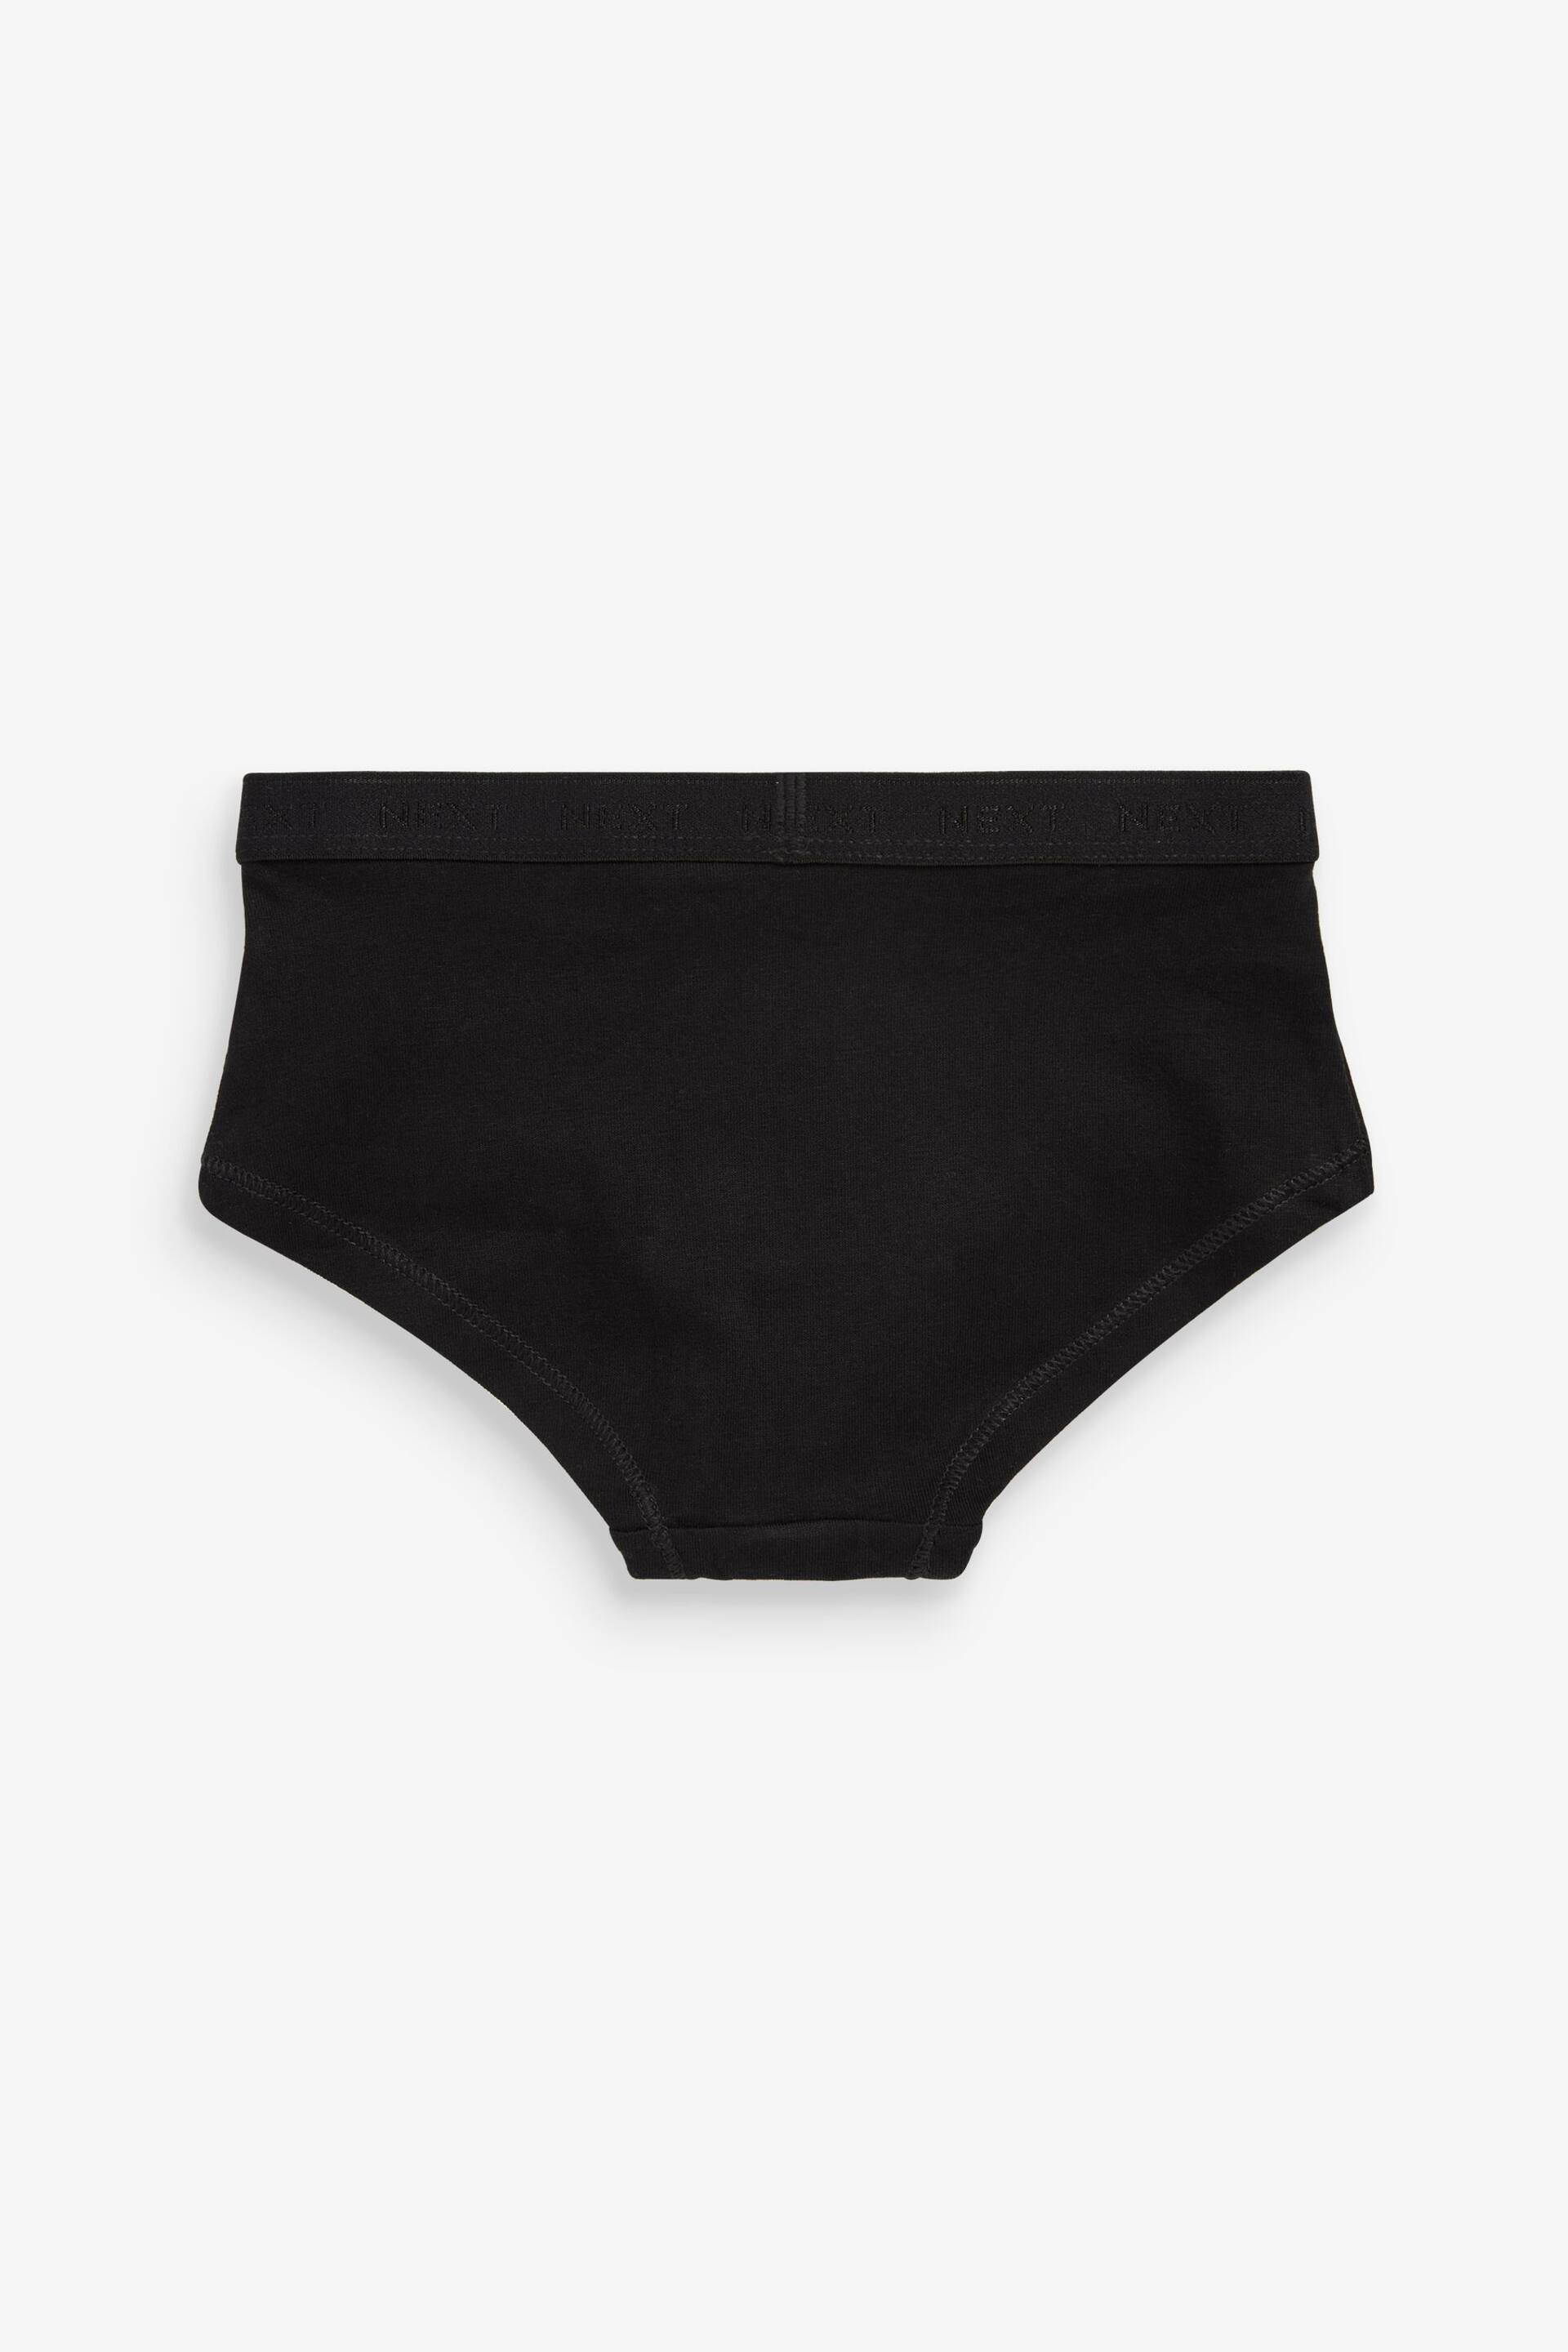 Black/White Hipster Briefs 7 Pack (2-16yrs) - Image 5 of 6